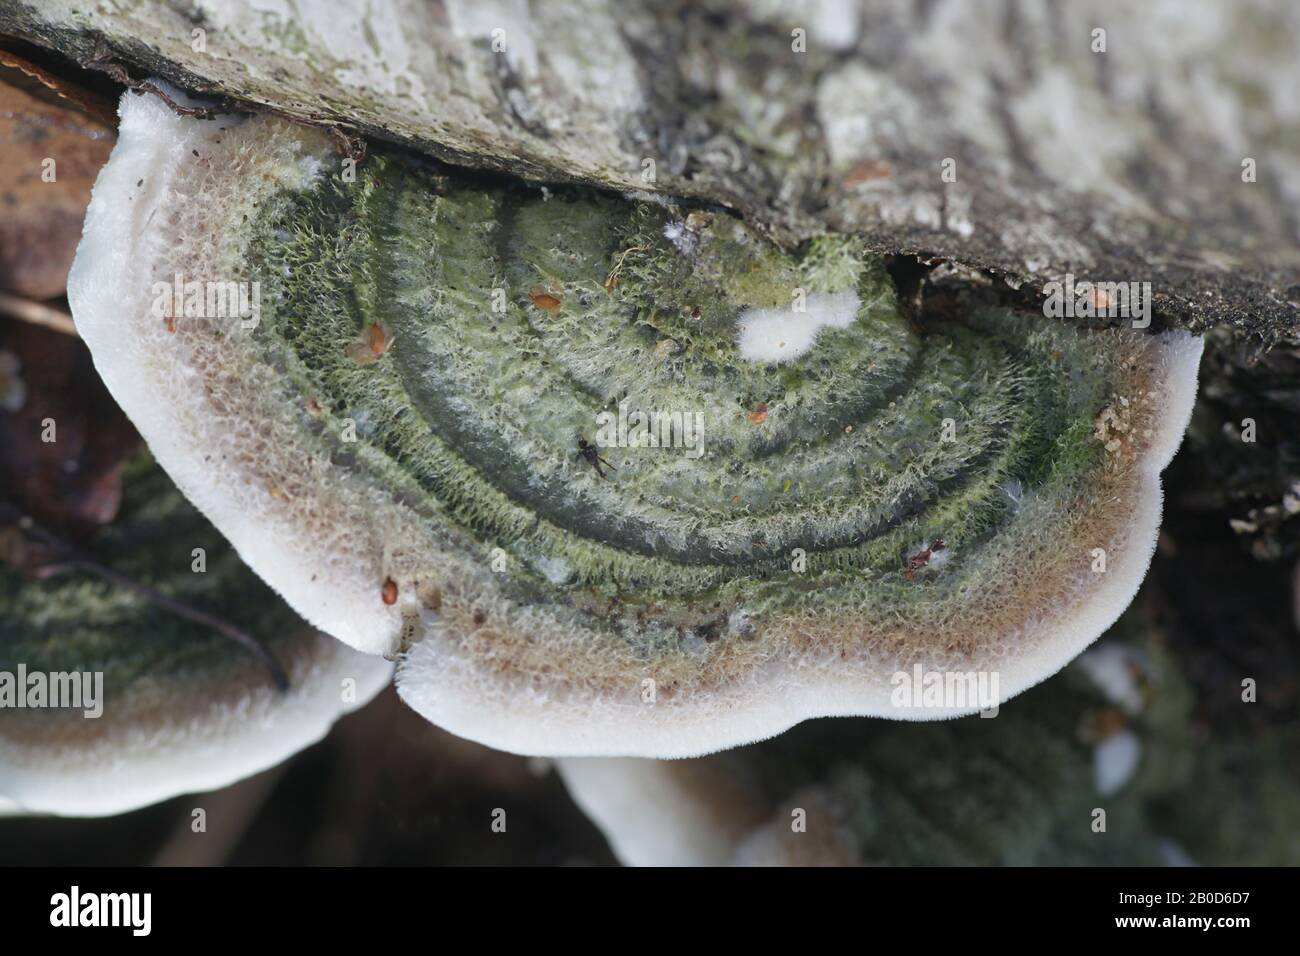 Cerrena unicolor, commonly known as the mossy maze polypore or canker rot fungus, wild bracket fungus from Finland Stock Photo